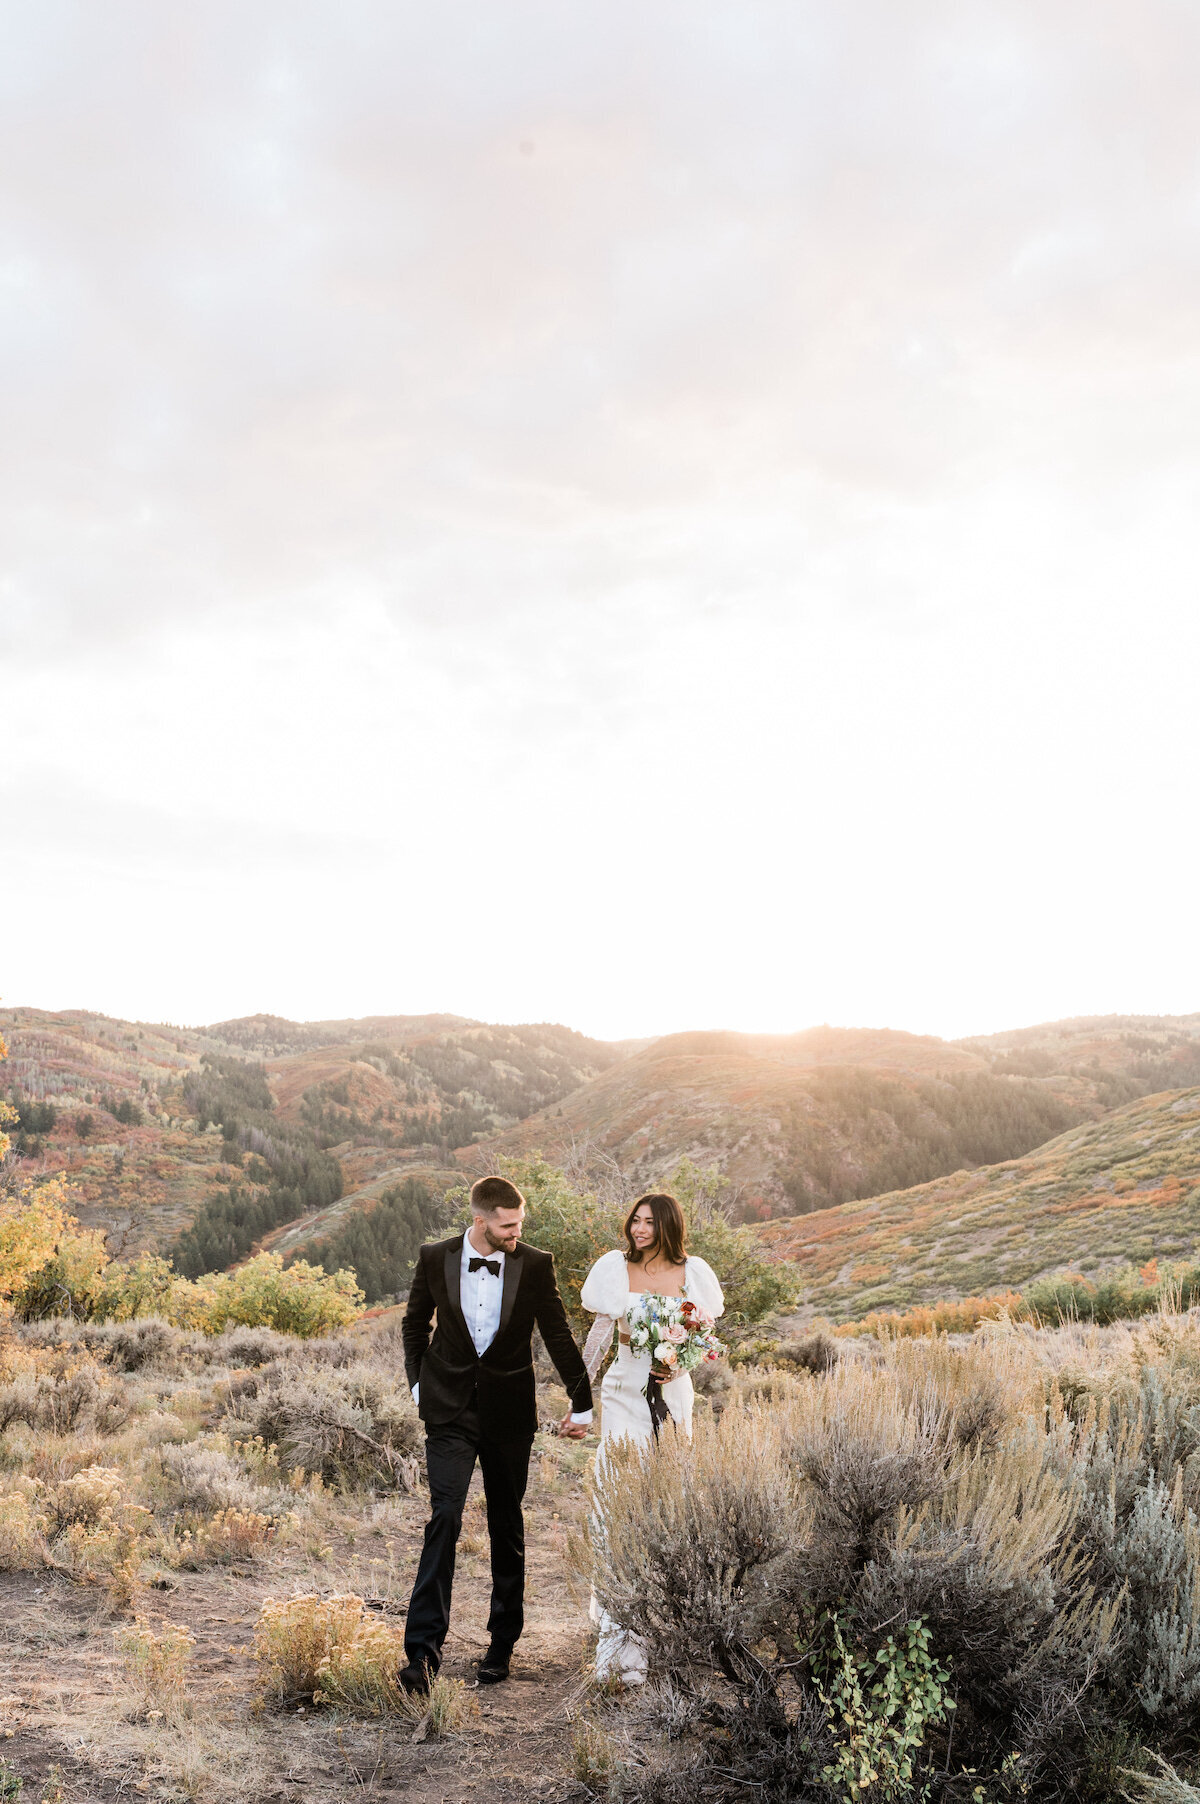 Crafting memories that last a lifetime, our destination photography in Park City, Utah, tells the tale of your love story against the backdrop of nature's beauty.